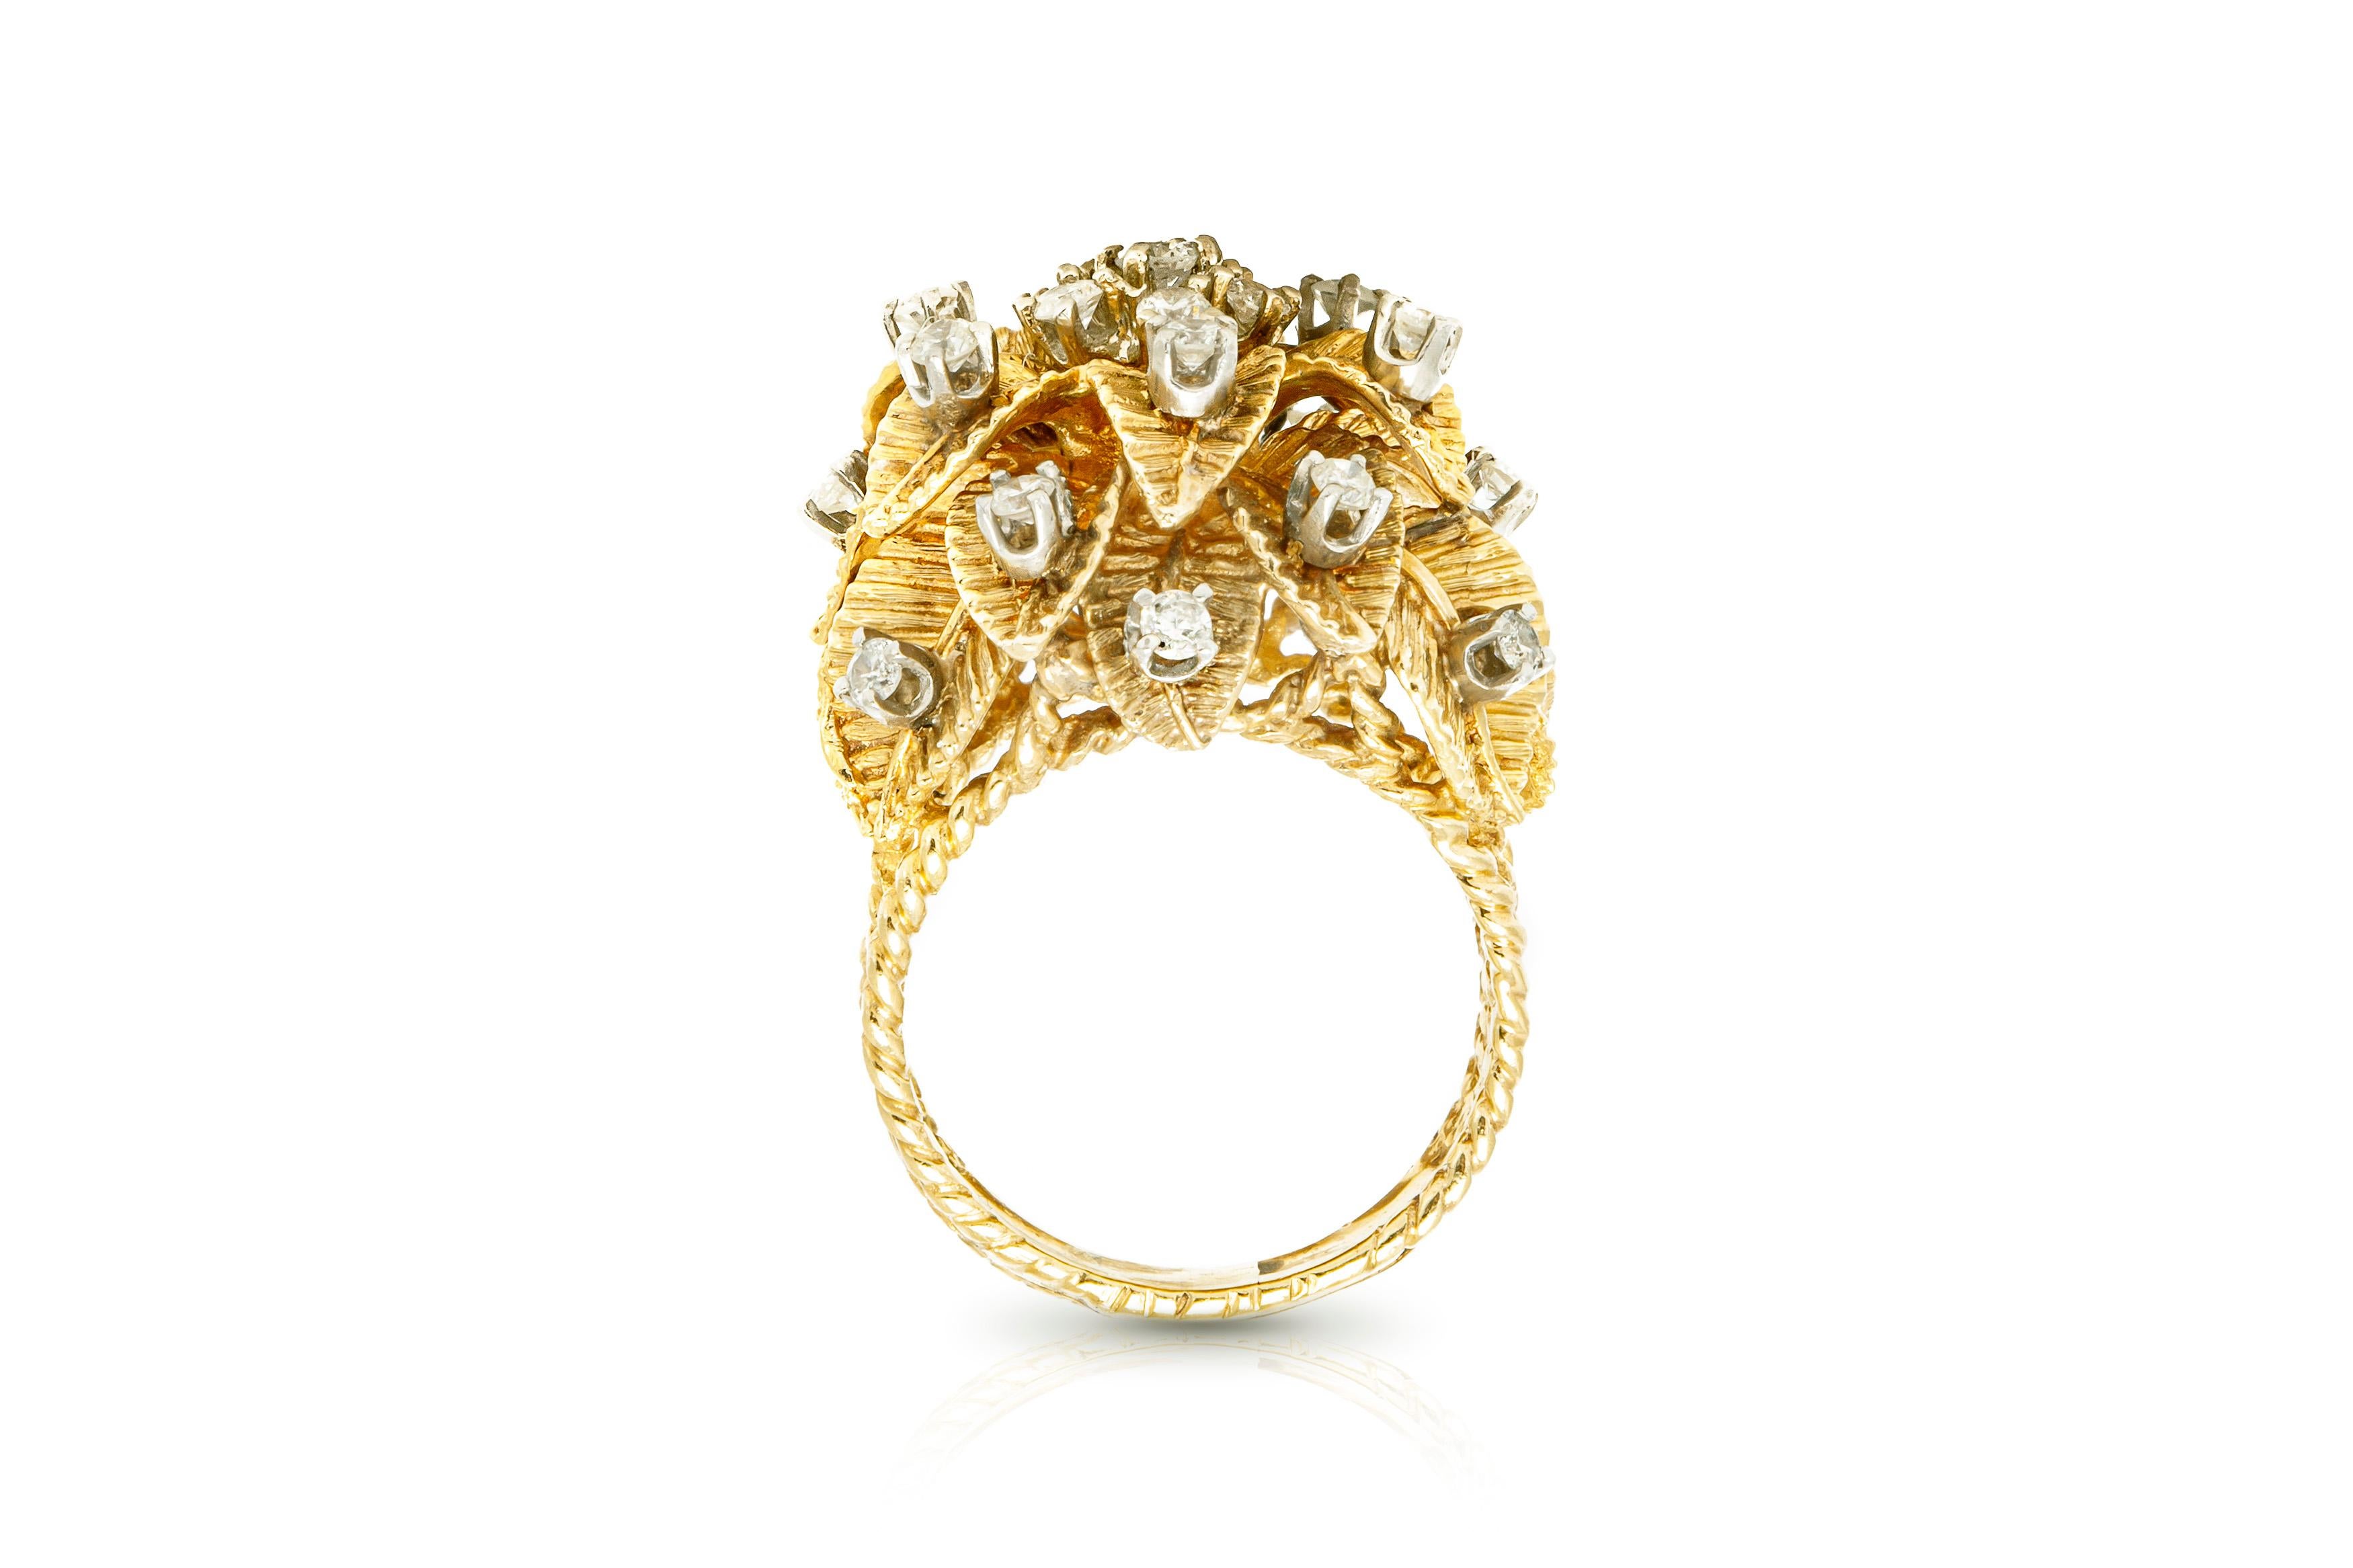 The ring is finely crafted in 14K with few diamonds around weighing approximately total of 1.20 carat.
Daily and night ring.
